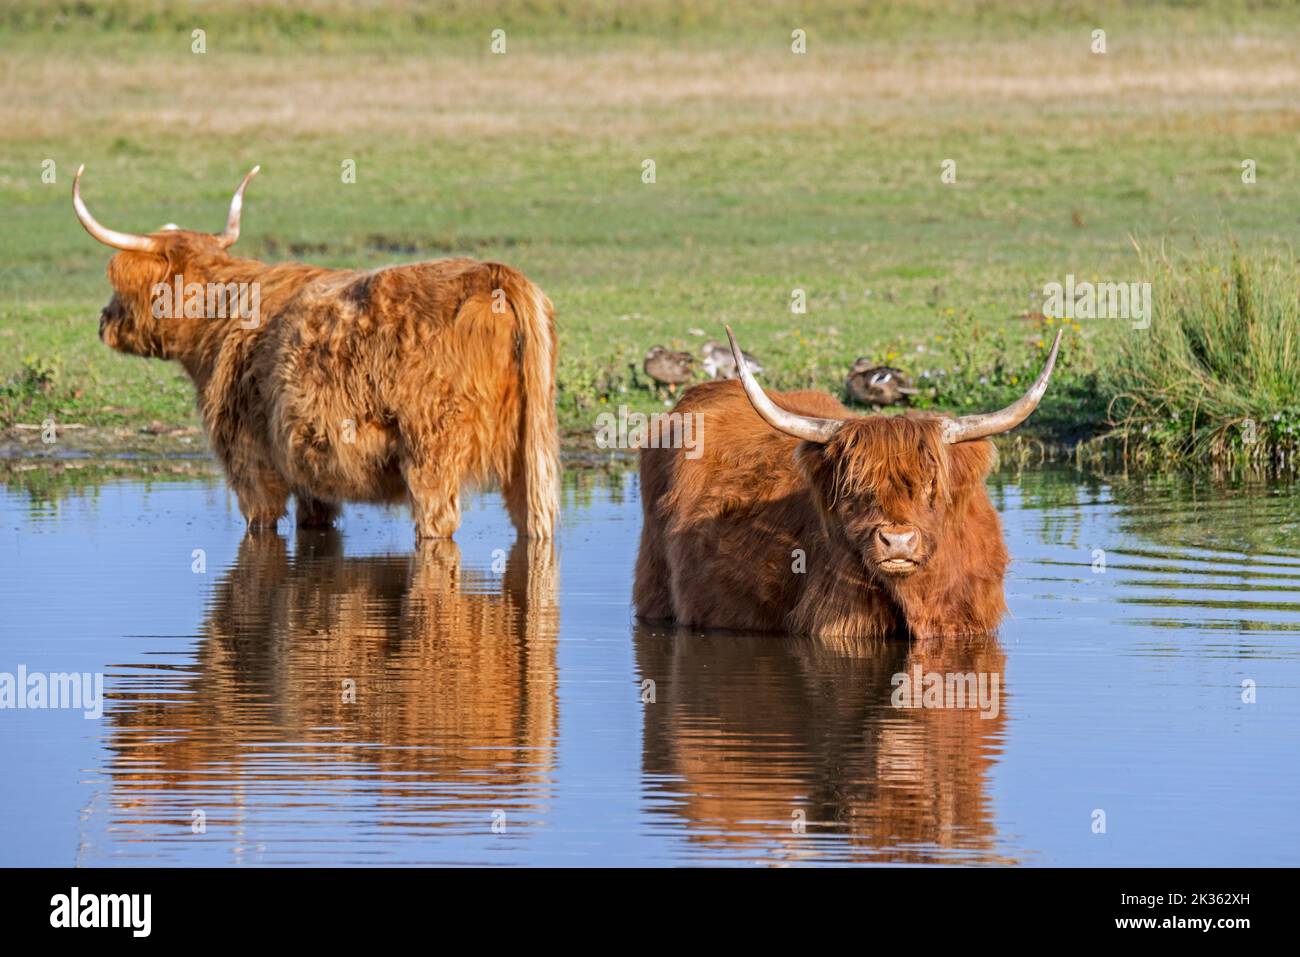 Two Highland cows, Scottish breed of rustic cattle wading in shallow water of pond Stock Photo